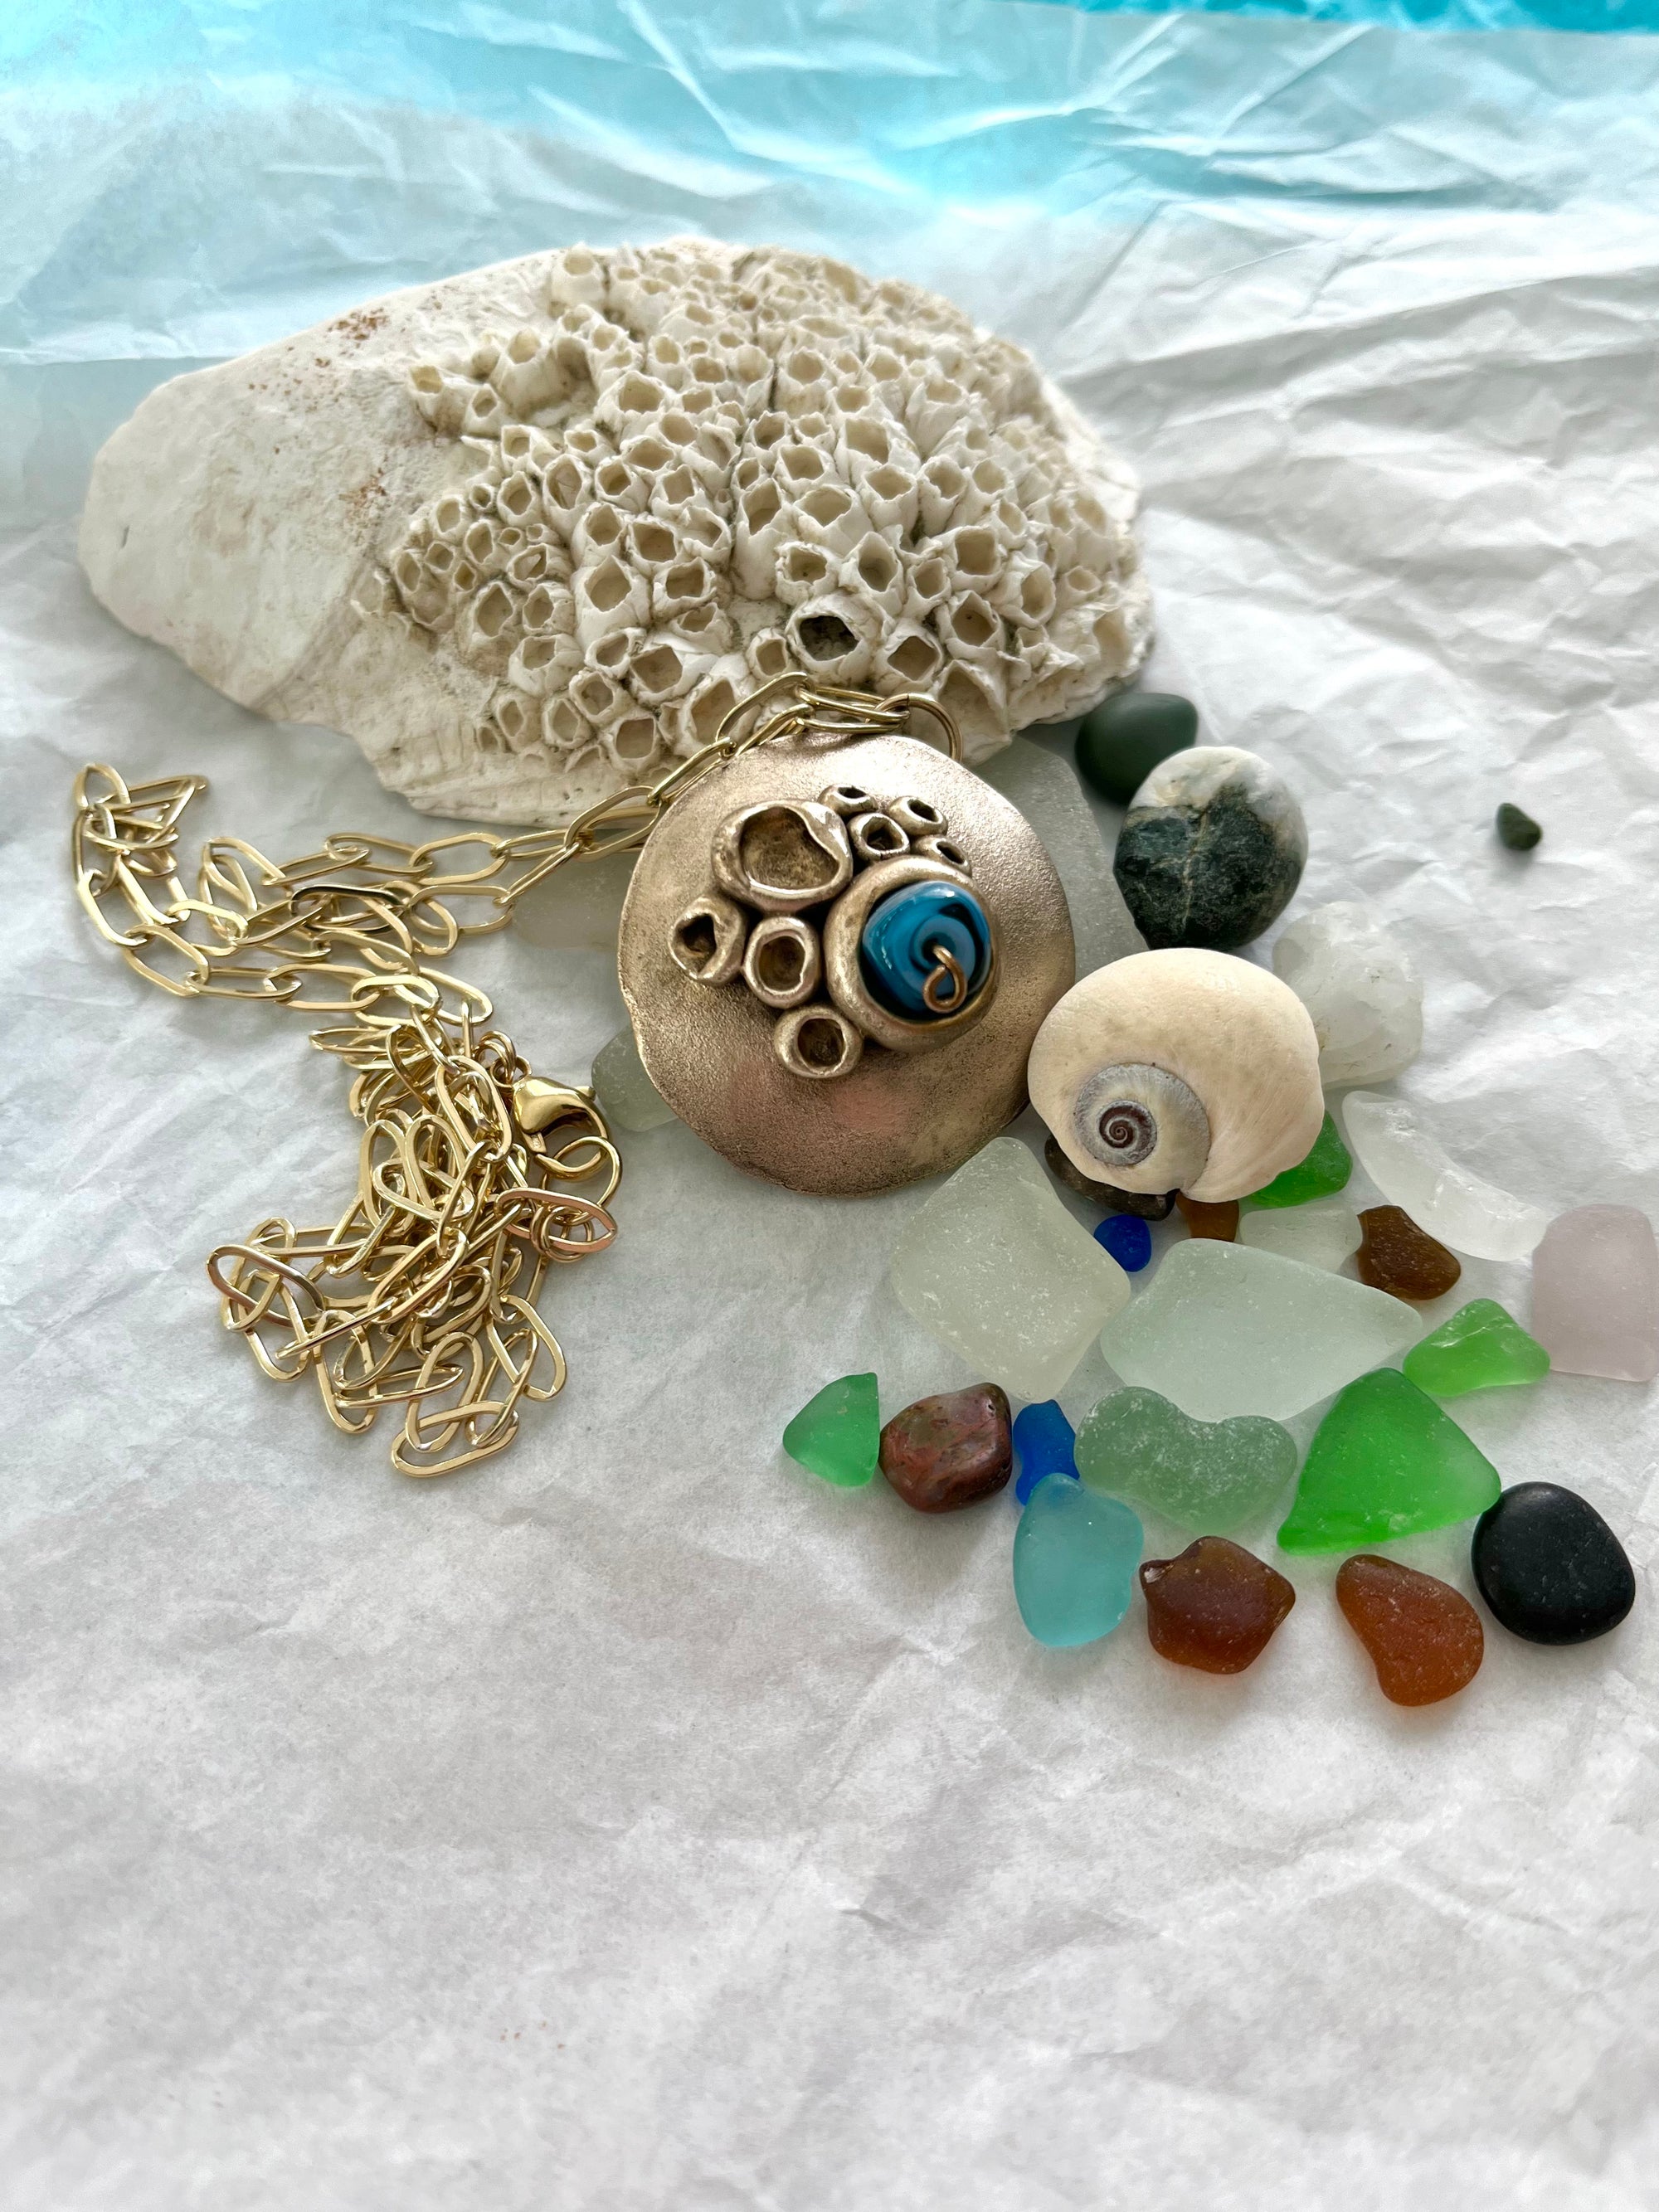 Seaglass with bronze necklace and seashells